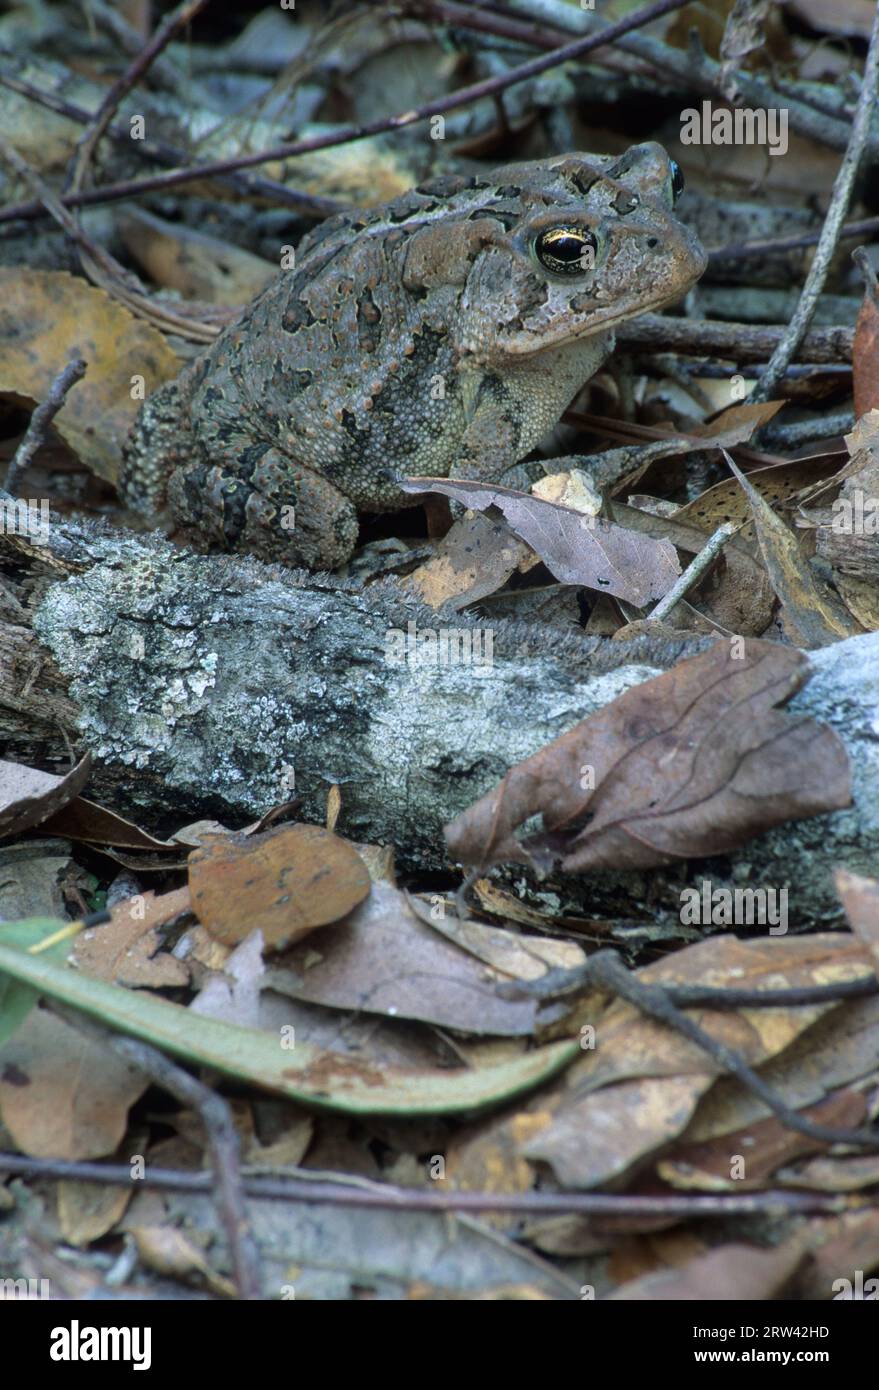 Toad on Garden of Eden Trail, Apalachicola Bluffs and Ravines Preserve, Florida Stock Photo